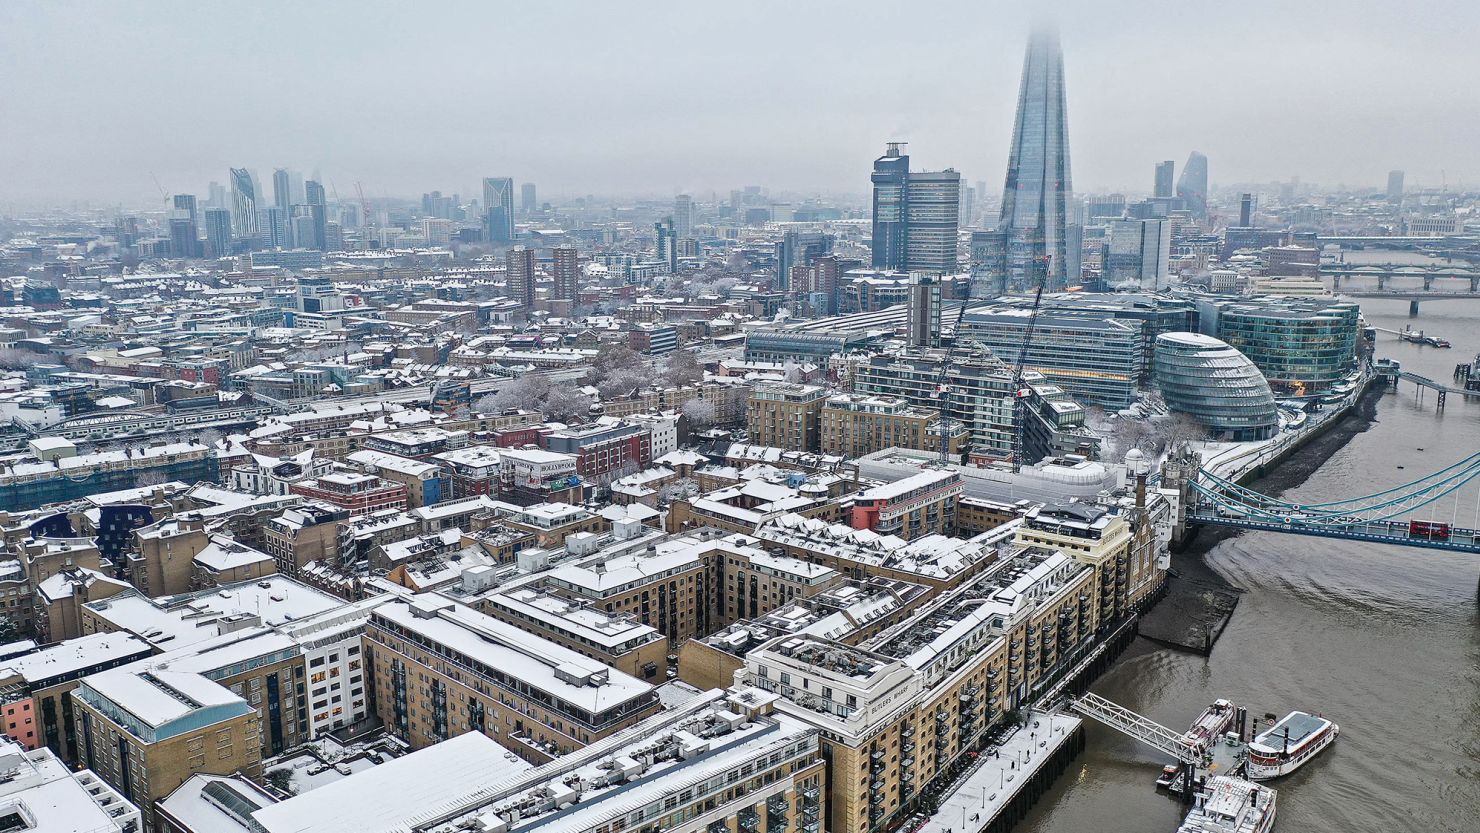 Snow hit London on Sunday evening and continued into Monday.